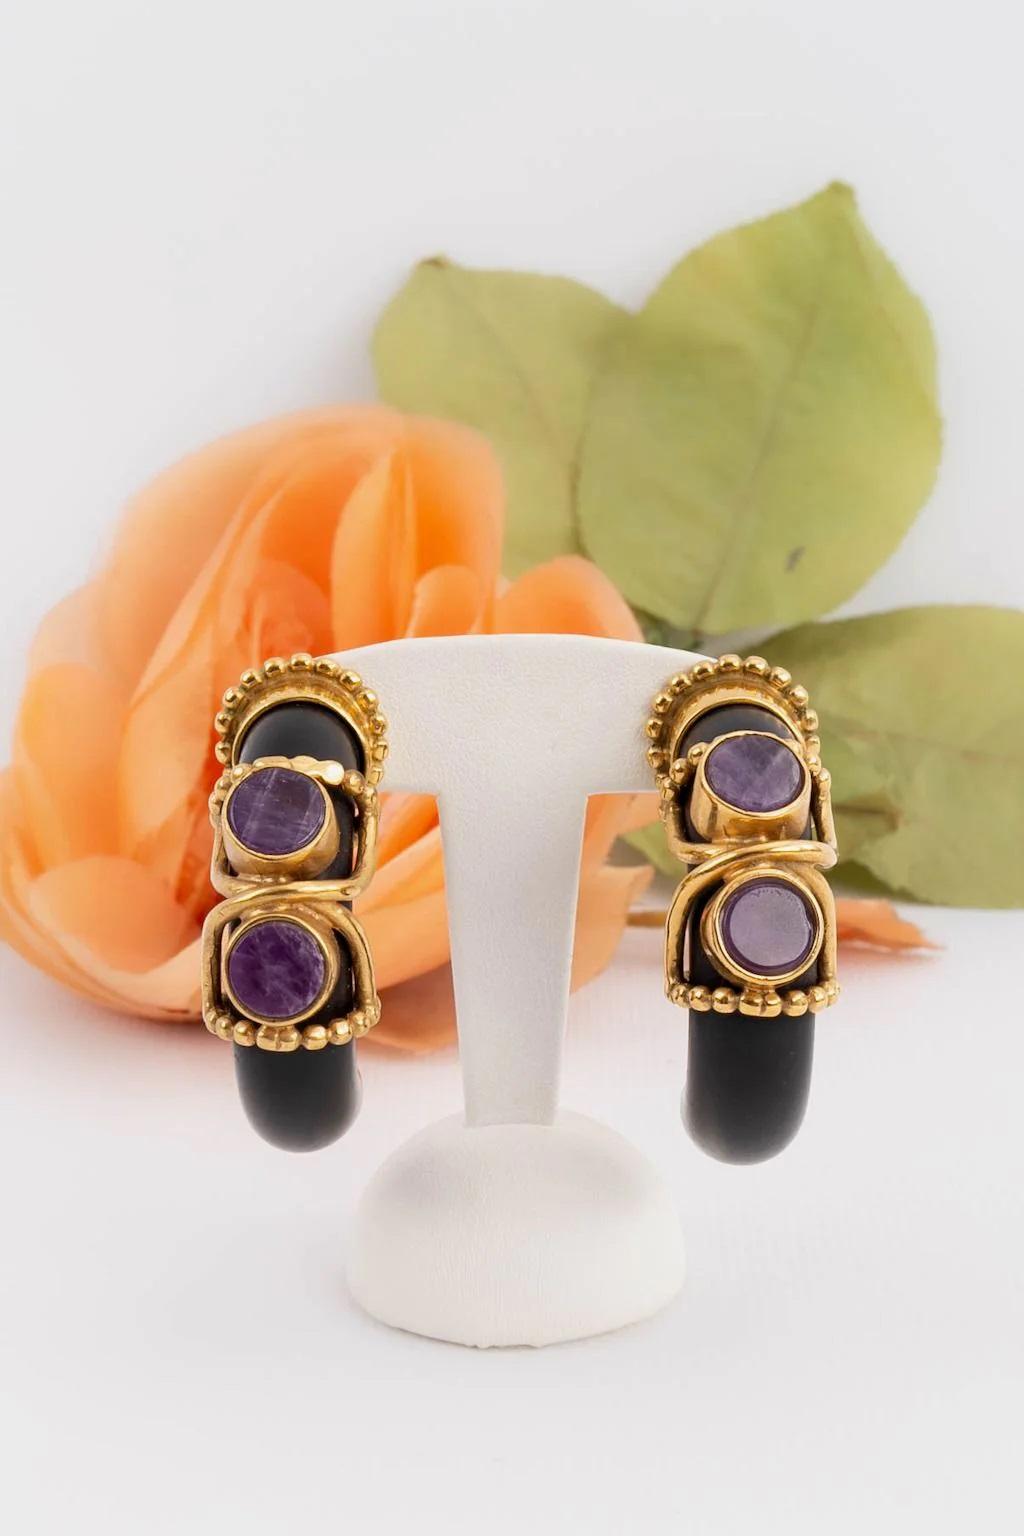 Women's Gilted Metal Clip-on Earrings with Wood and Cabochons in Amethyst Color For Sale